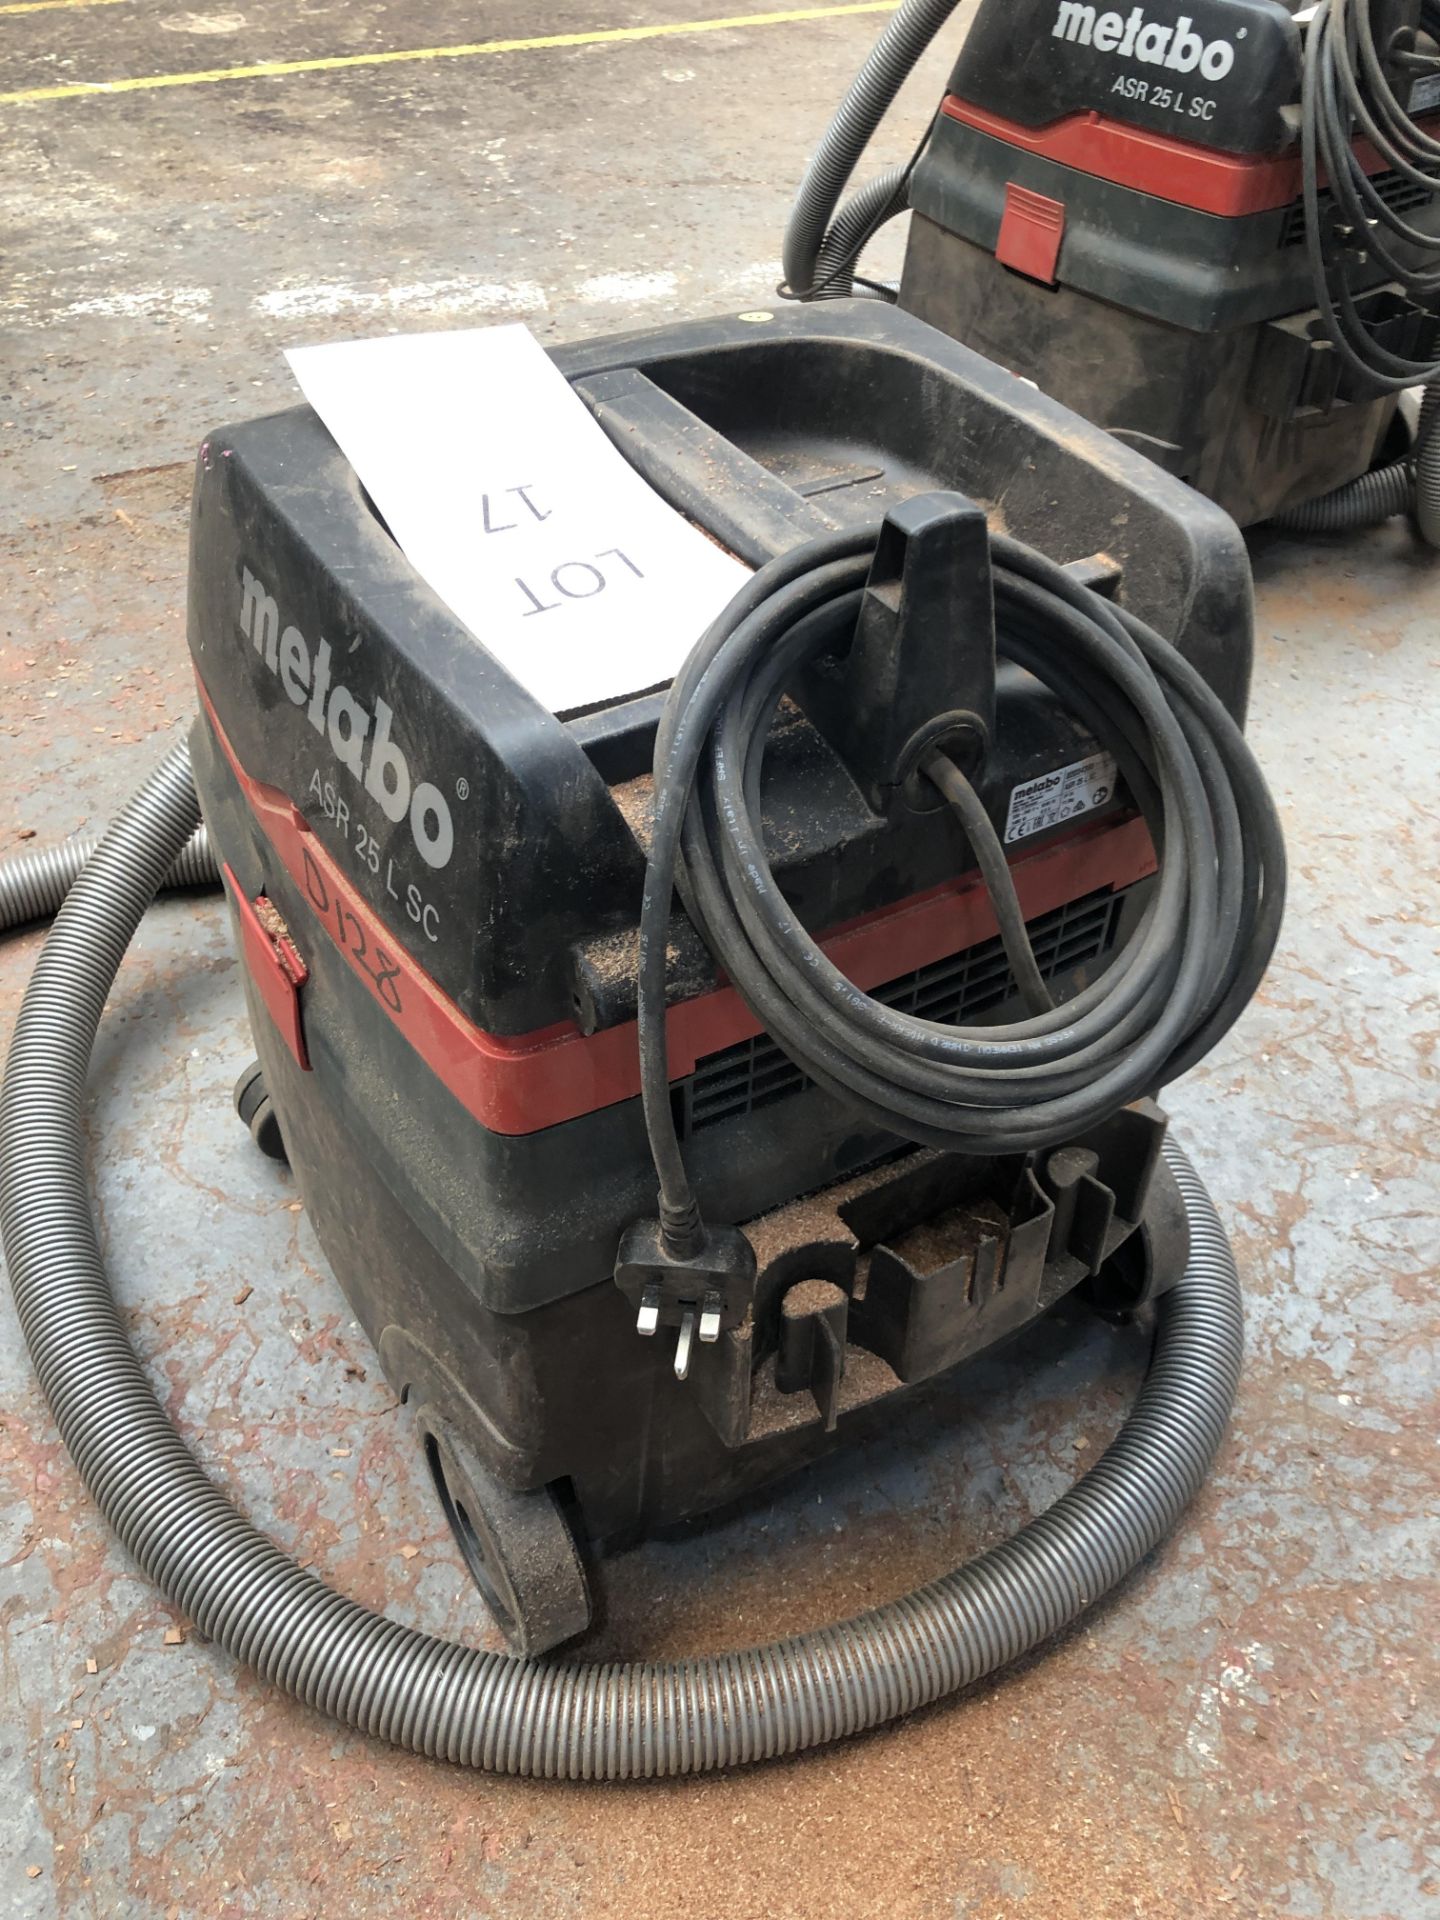 Metabo ASR25L SC Multi Dust Extraction Unit (Please note: Collection by appointment Wednesday 27th - Image 3 of 5